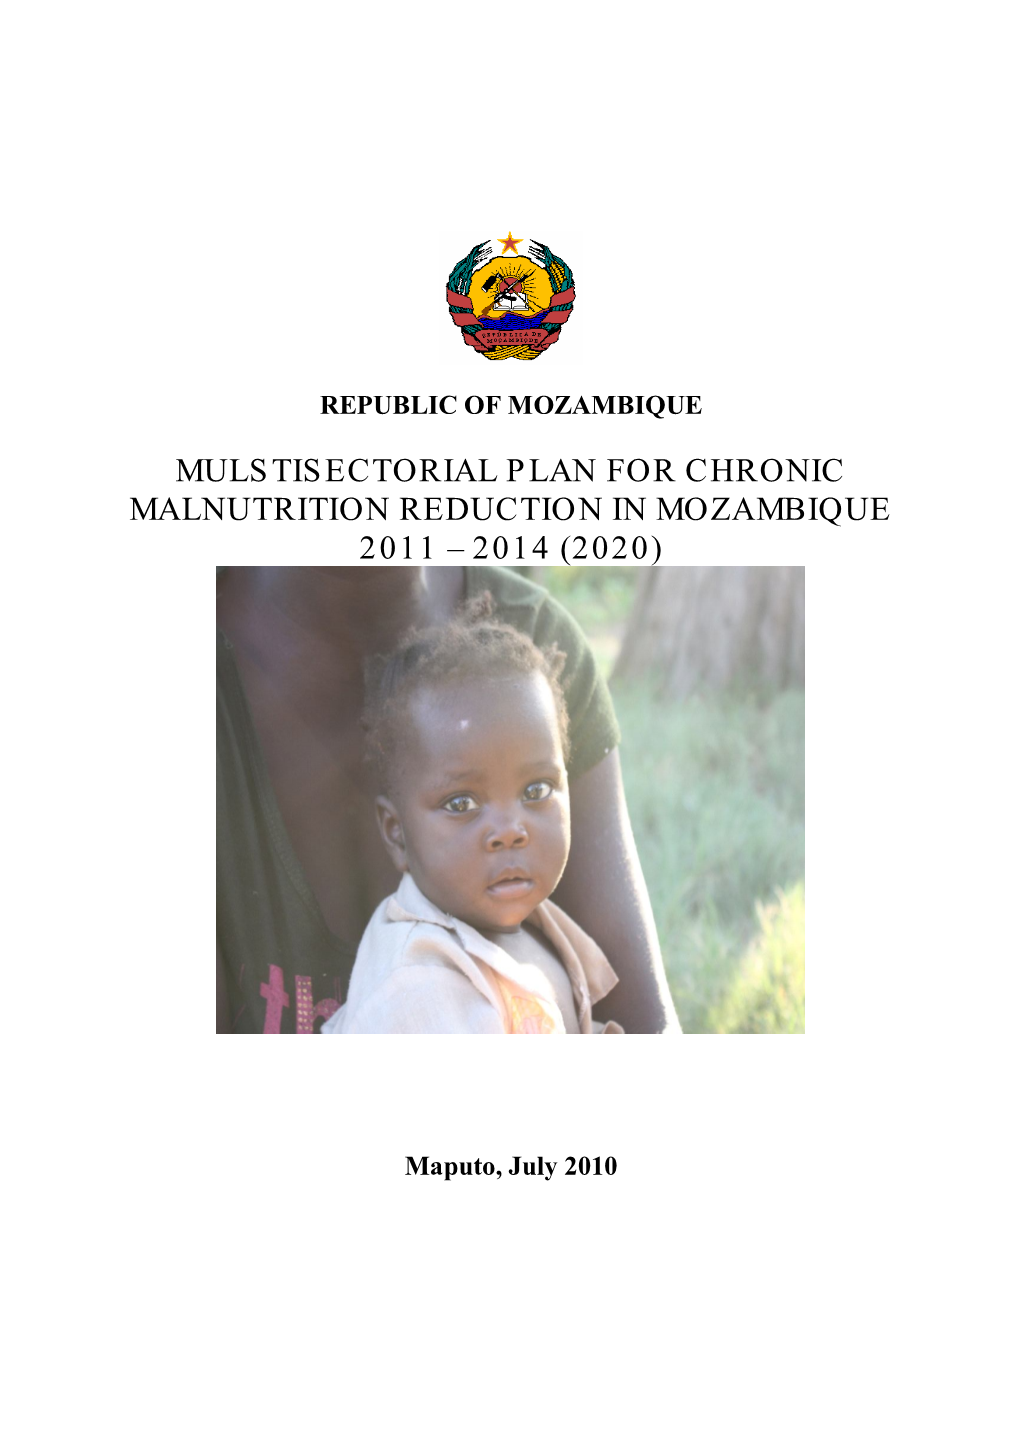 Mulstisectorial Plan for Chronic Malnutrition Reduction in Mozambique 2011 – 2014 (2020)